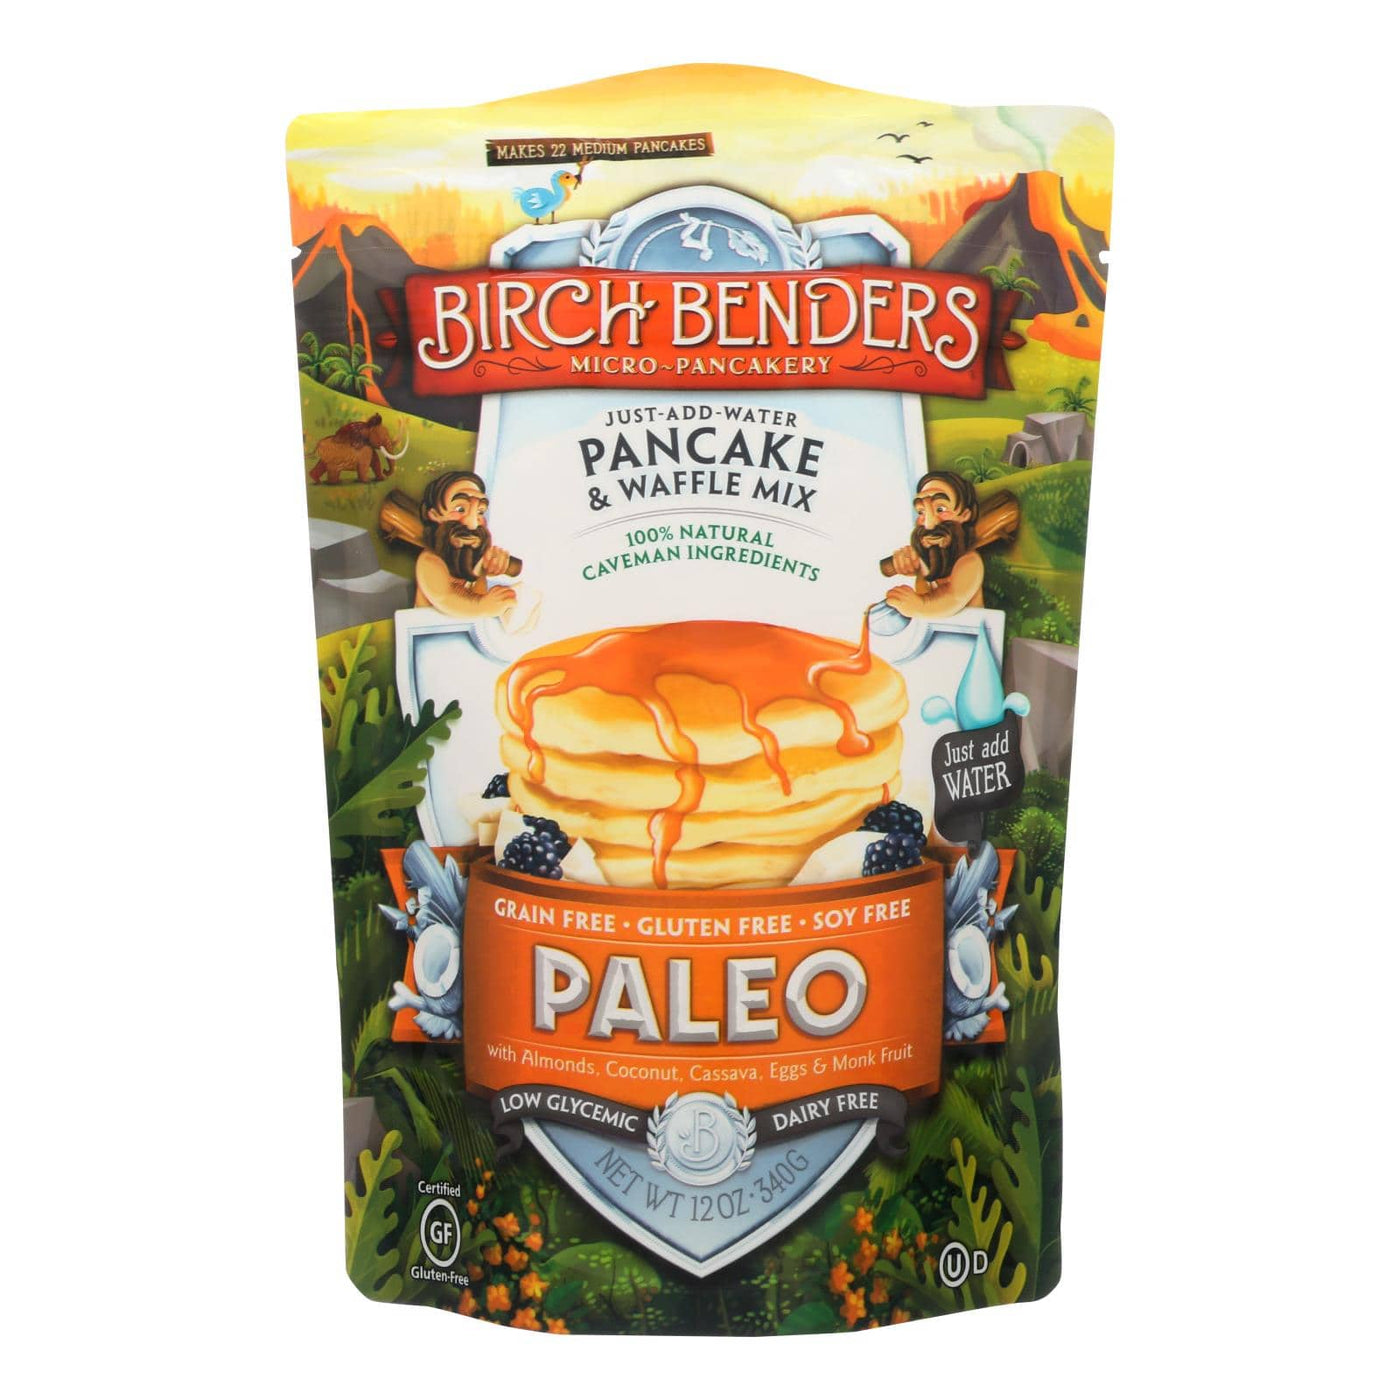 Birch Benders - Pancake And Waffle Mix - Paleo - Case Of 6 - 12 Oz | OnlyNaturals.us